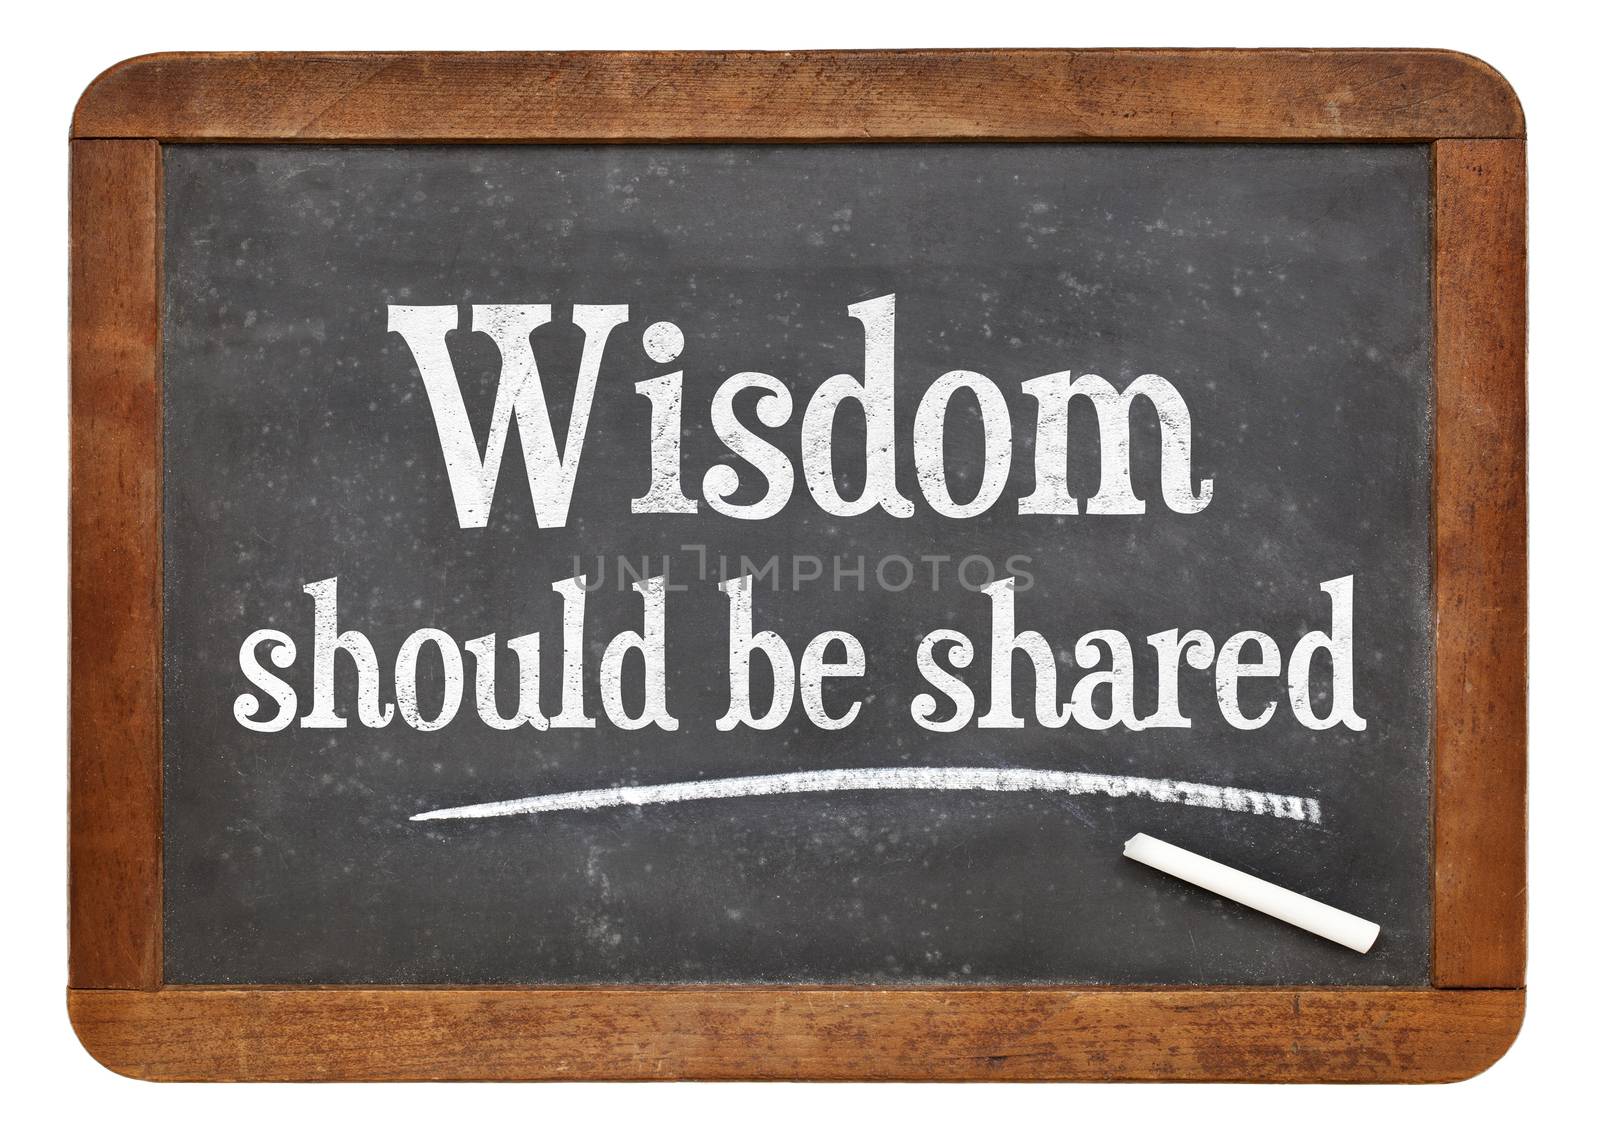 Wisdom should be share - inspirational text in white chalk on a vintage slate blackboard